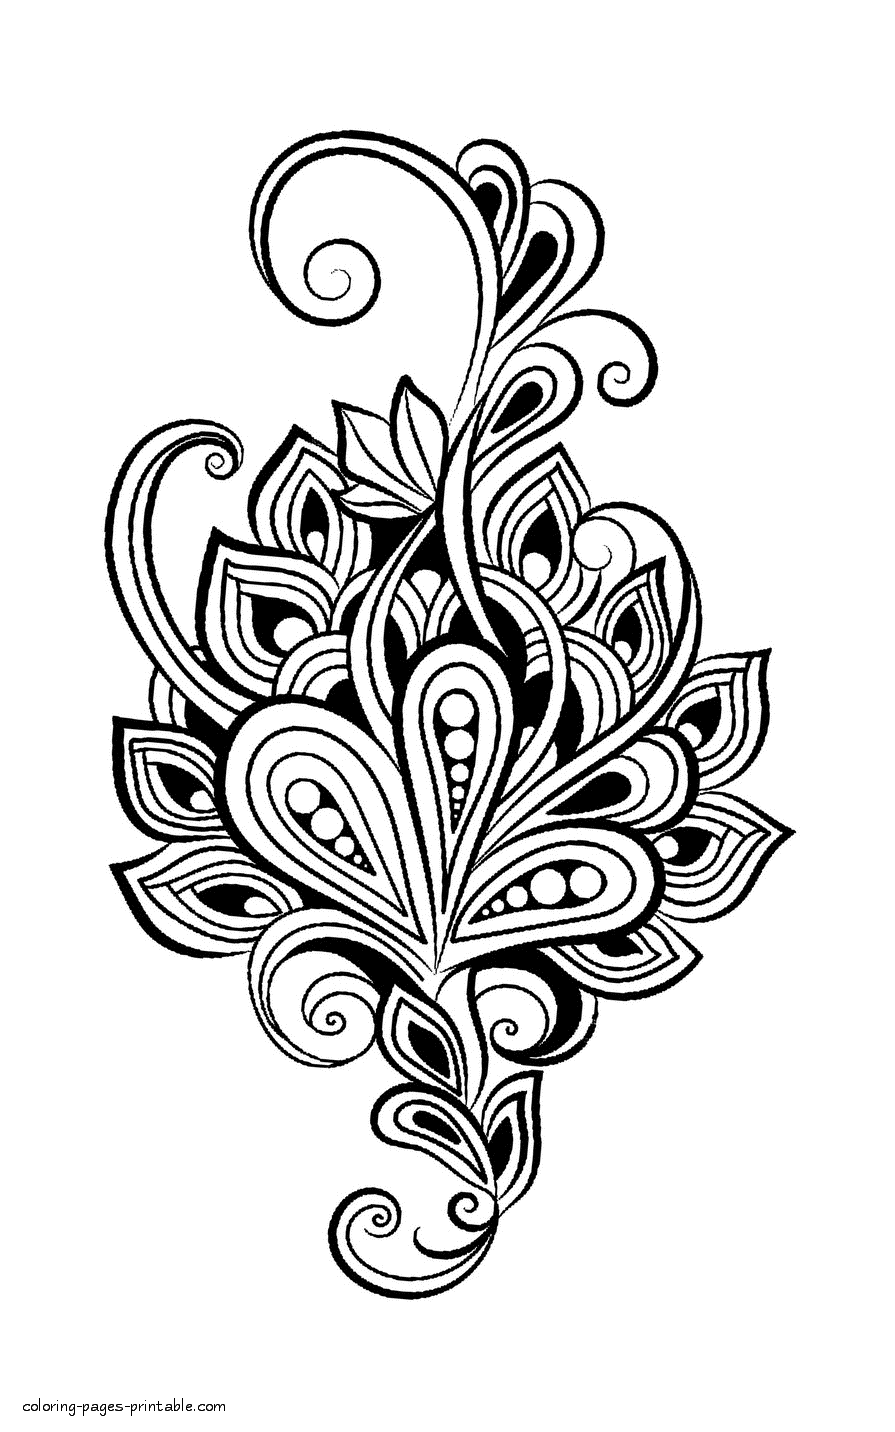 Abstract Coloring Pages For Adults And Artists || COLORING-PAGES